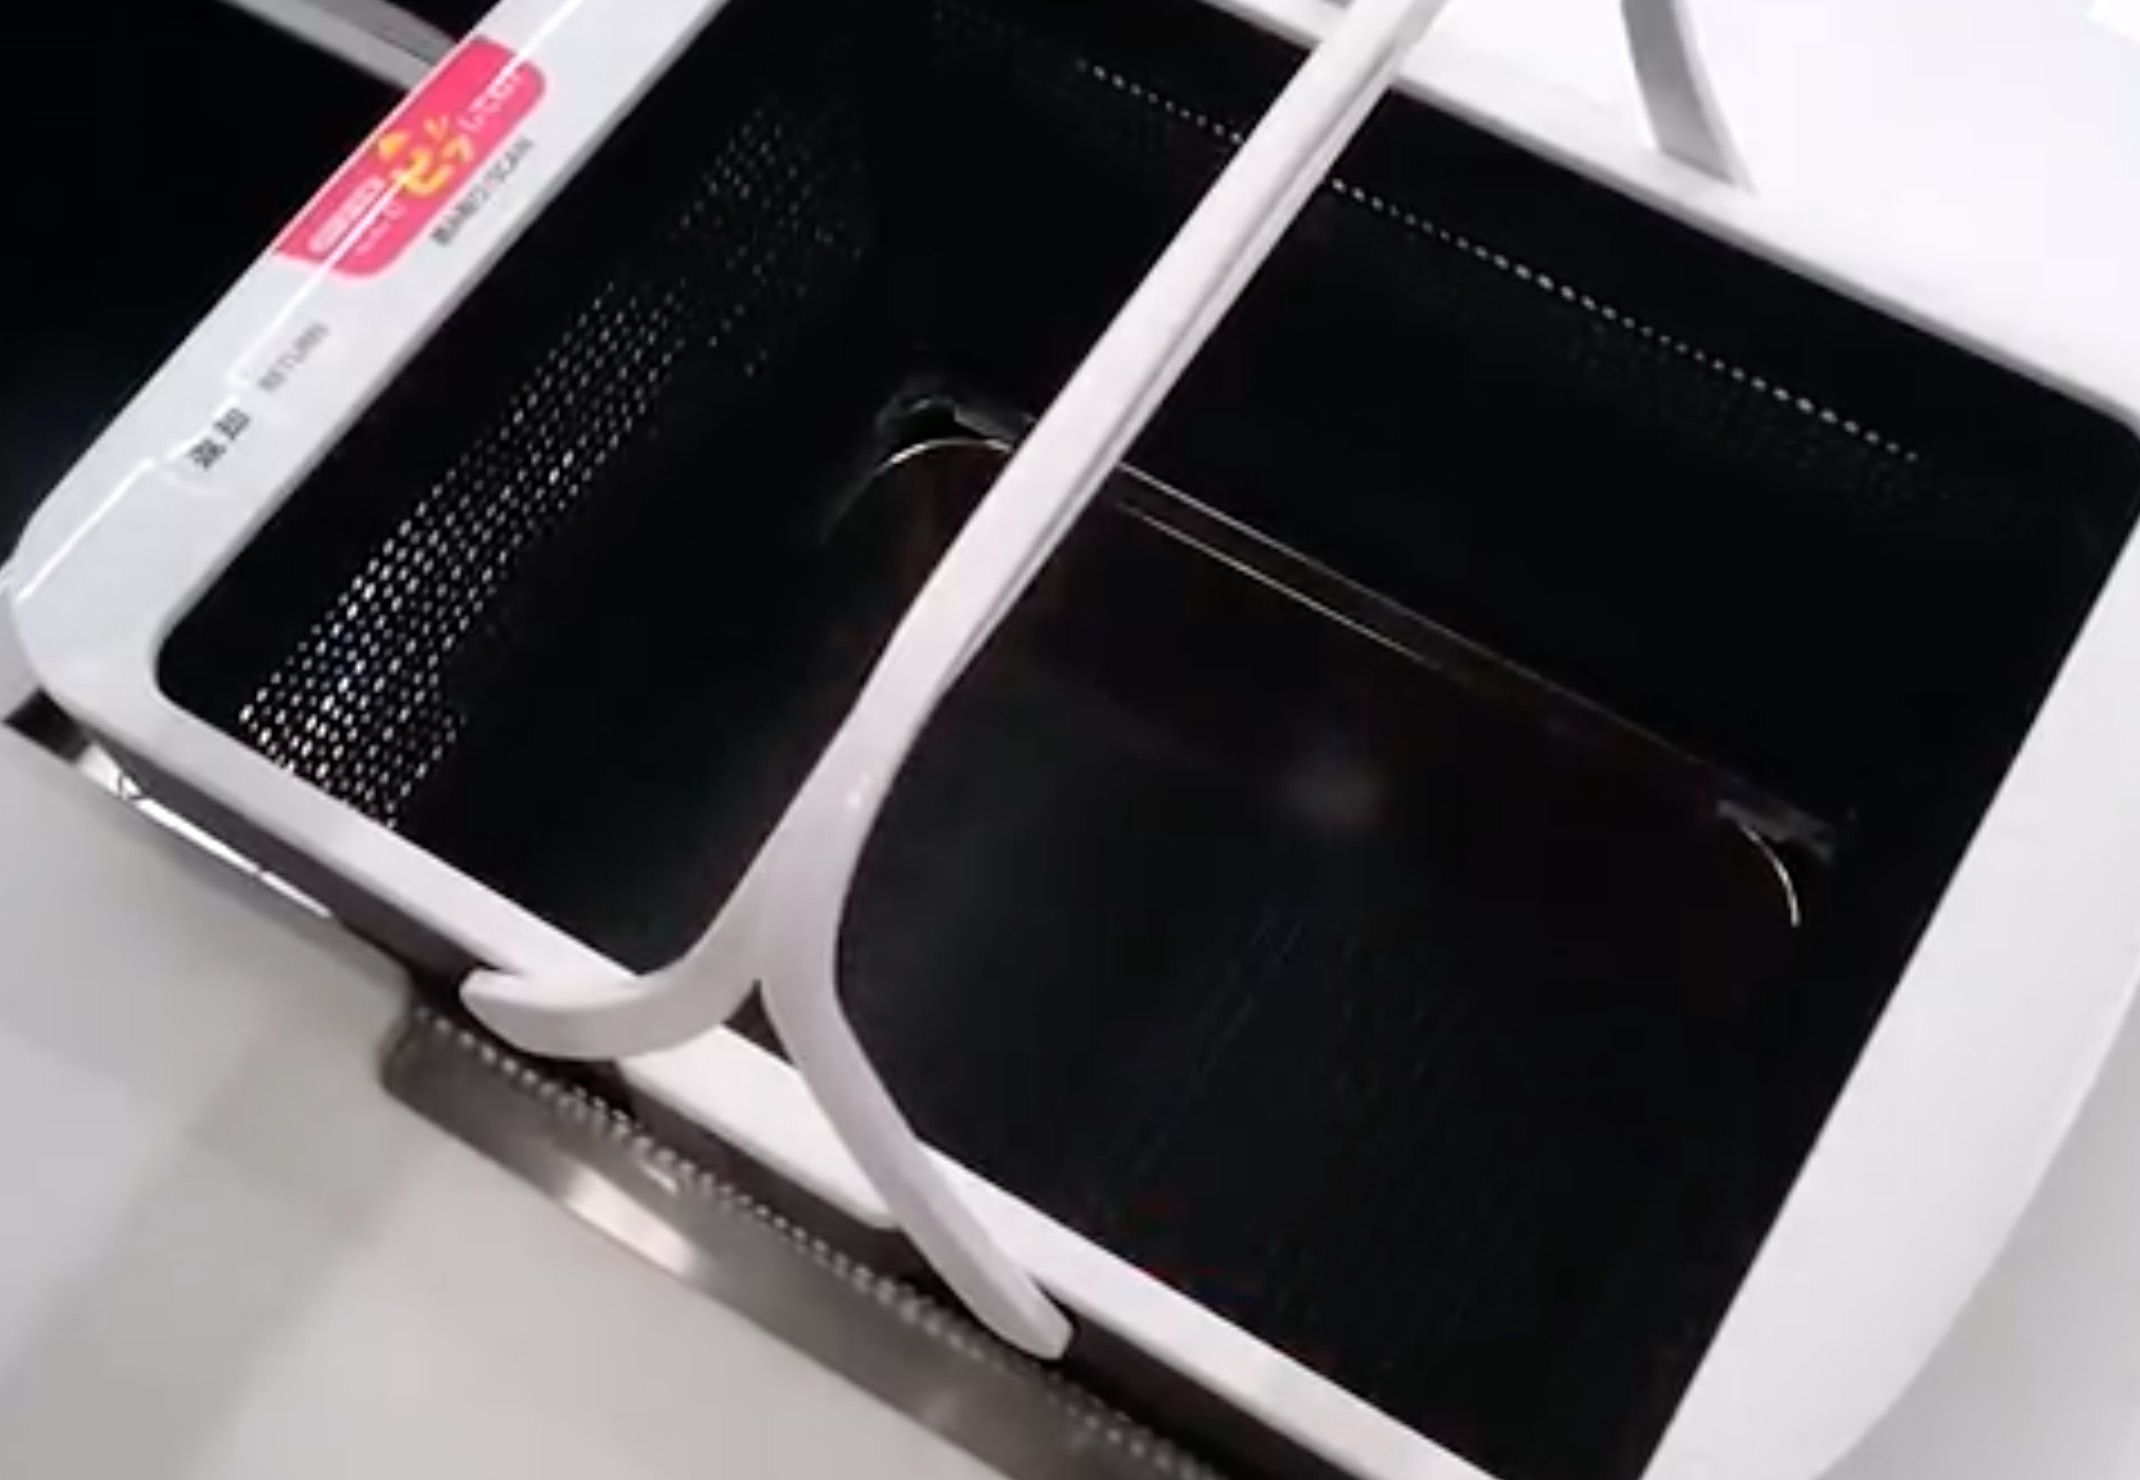 now panasonic wants to automate store checkouts with this basket image 1